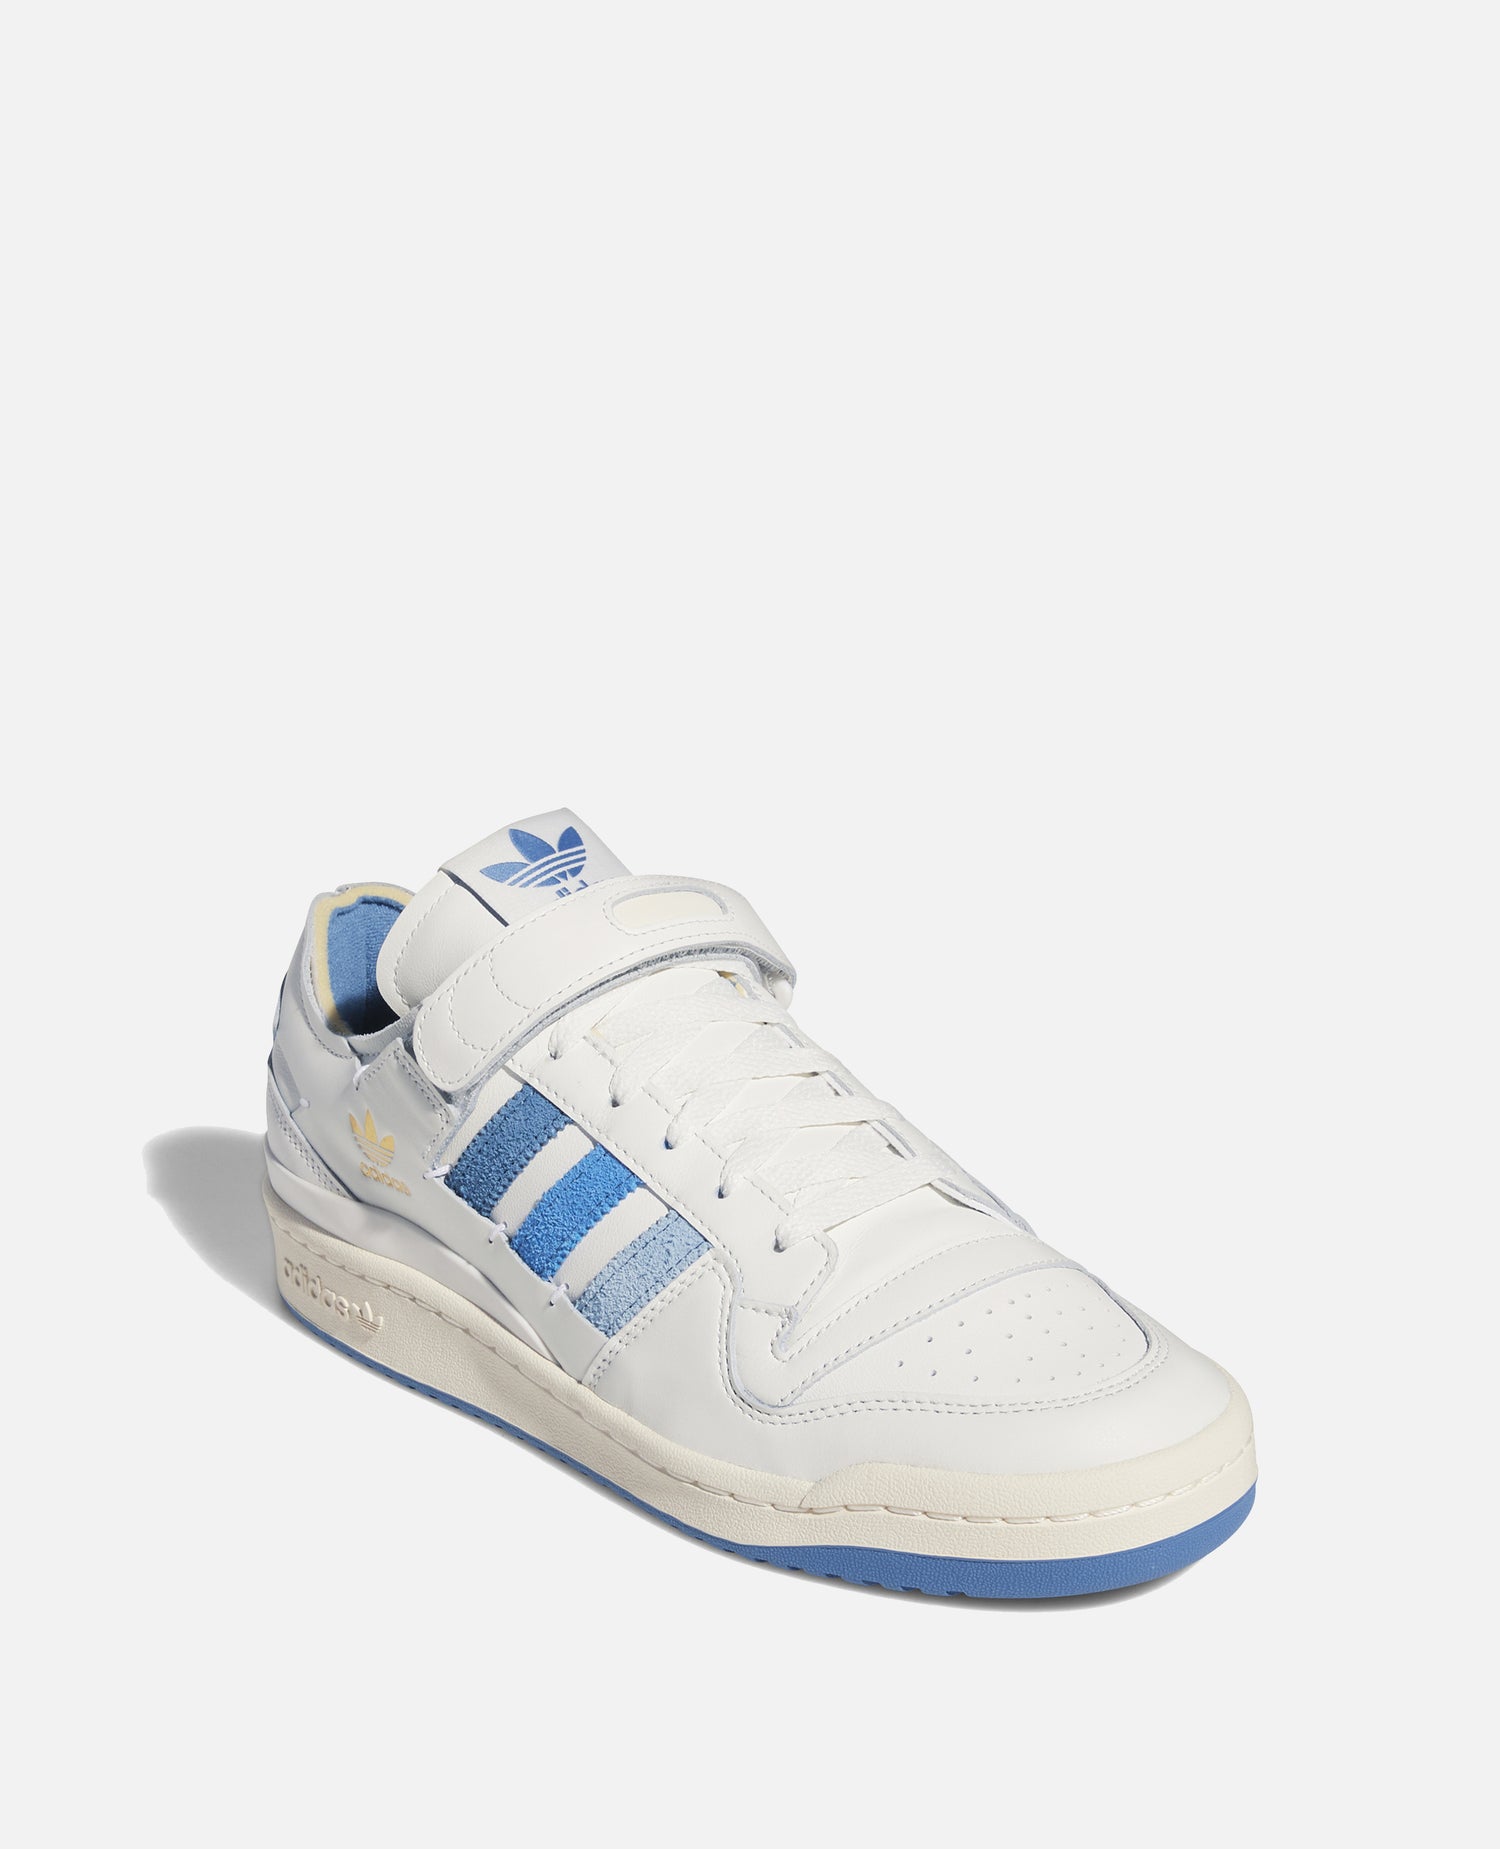 adidas Forum 84 Low (Cloud White/Altered Blue/Pulse Blue)